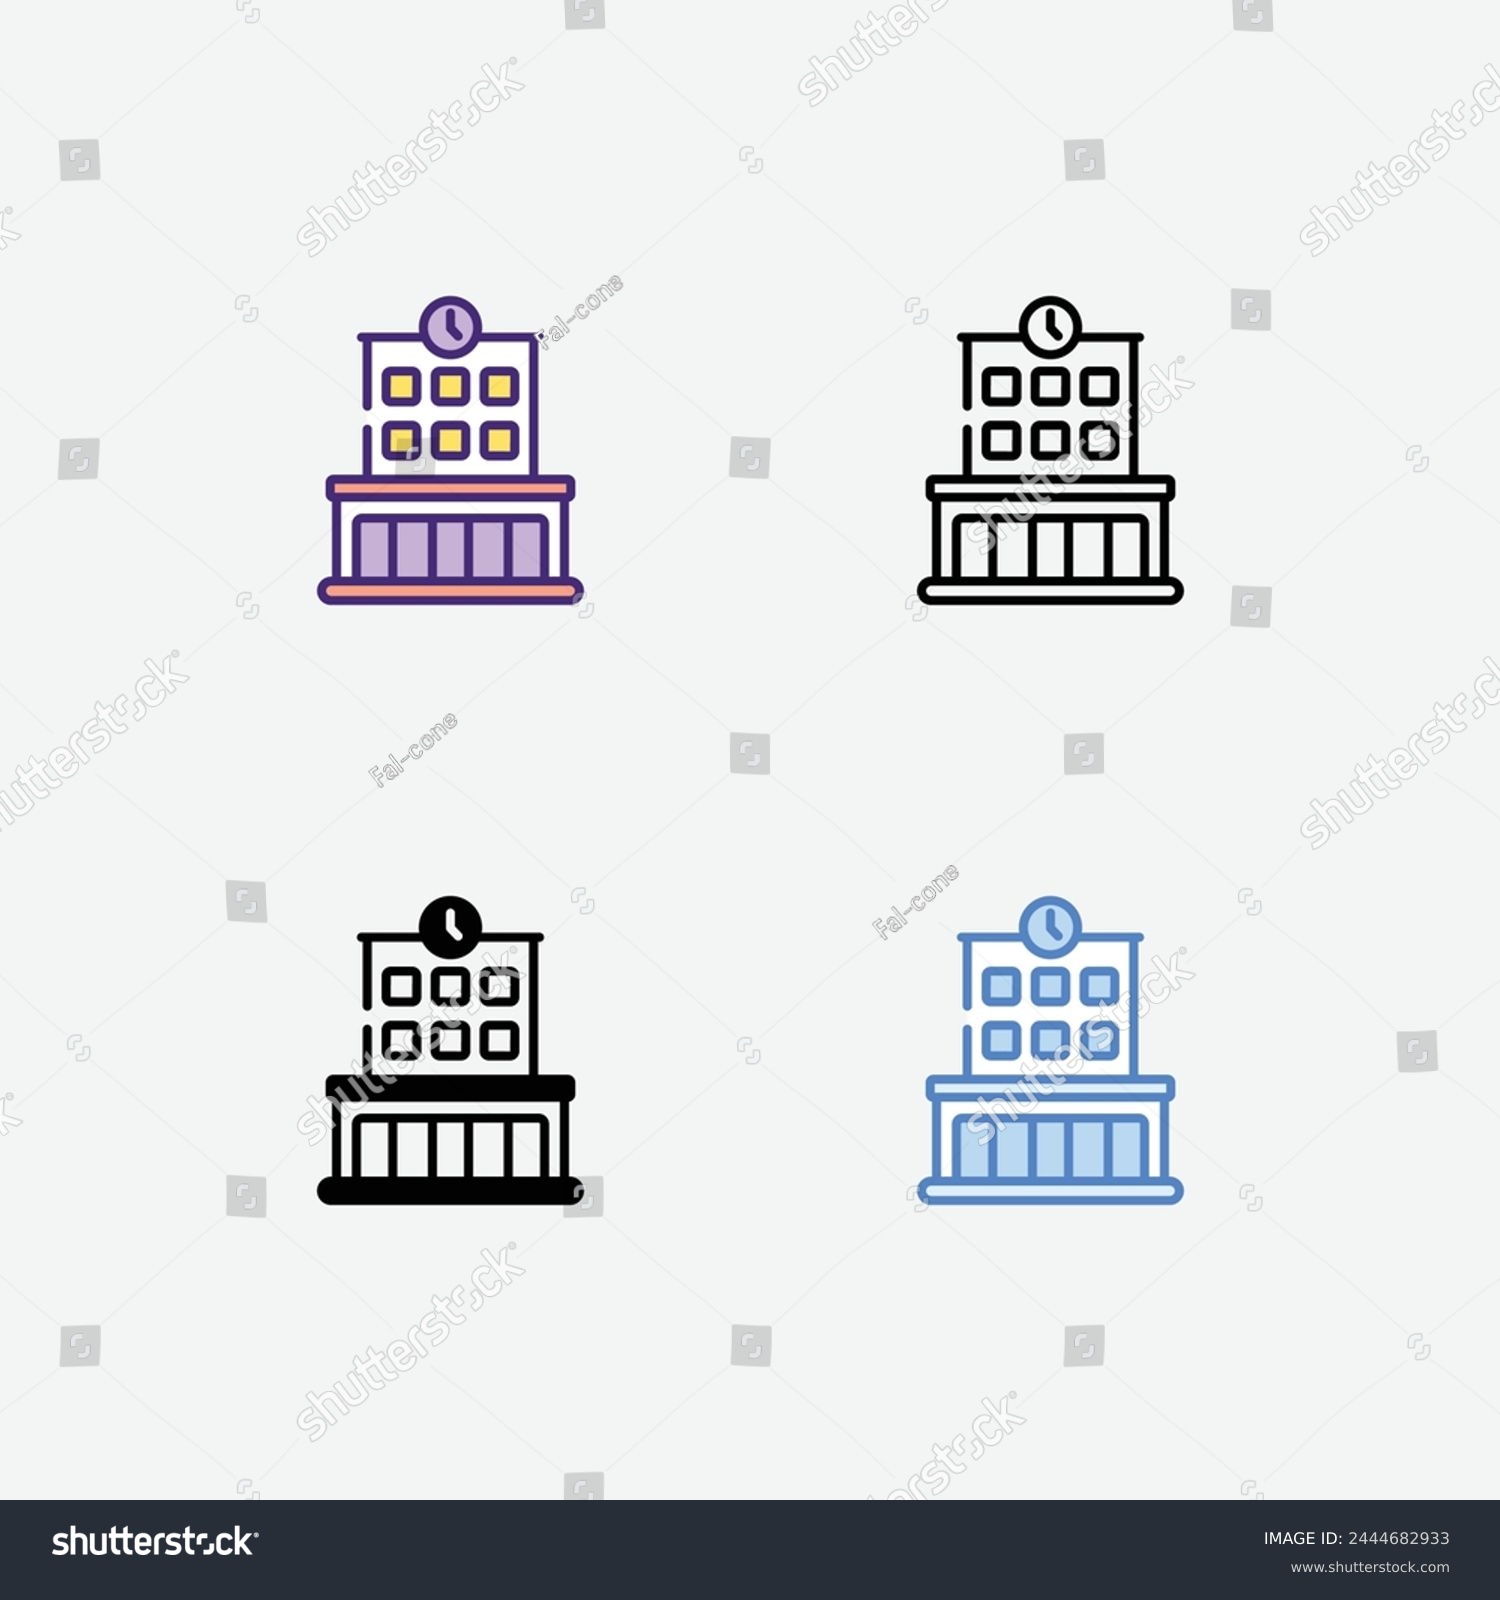 SVG of Port icons set in 4 different style vector illustration svg